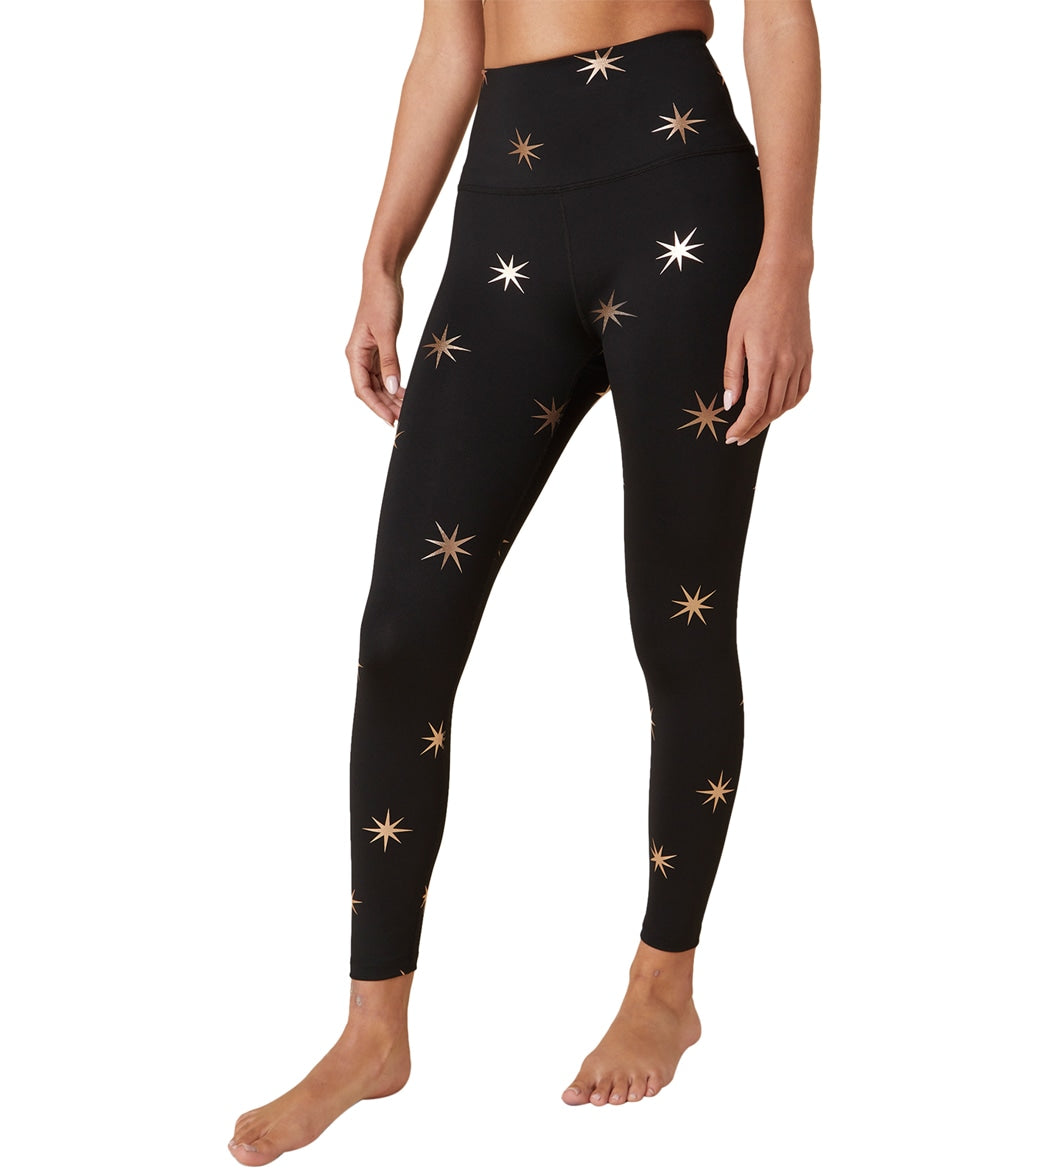 Beyond Yoga High Waisted Midi Legging at YogaOutlet.com - Free Shipping –